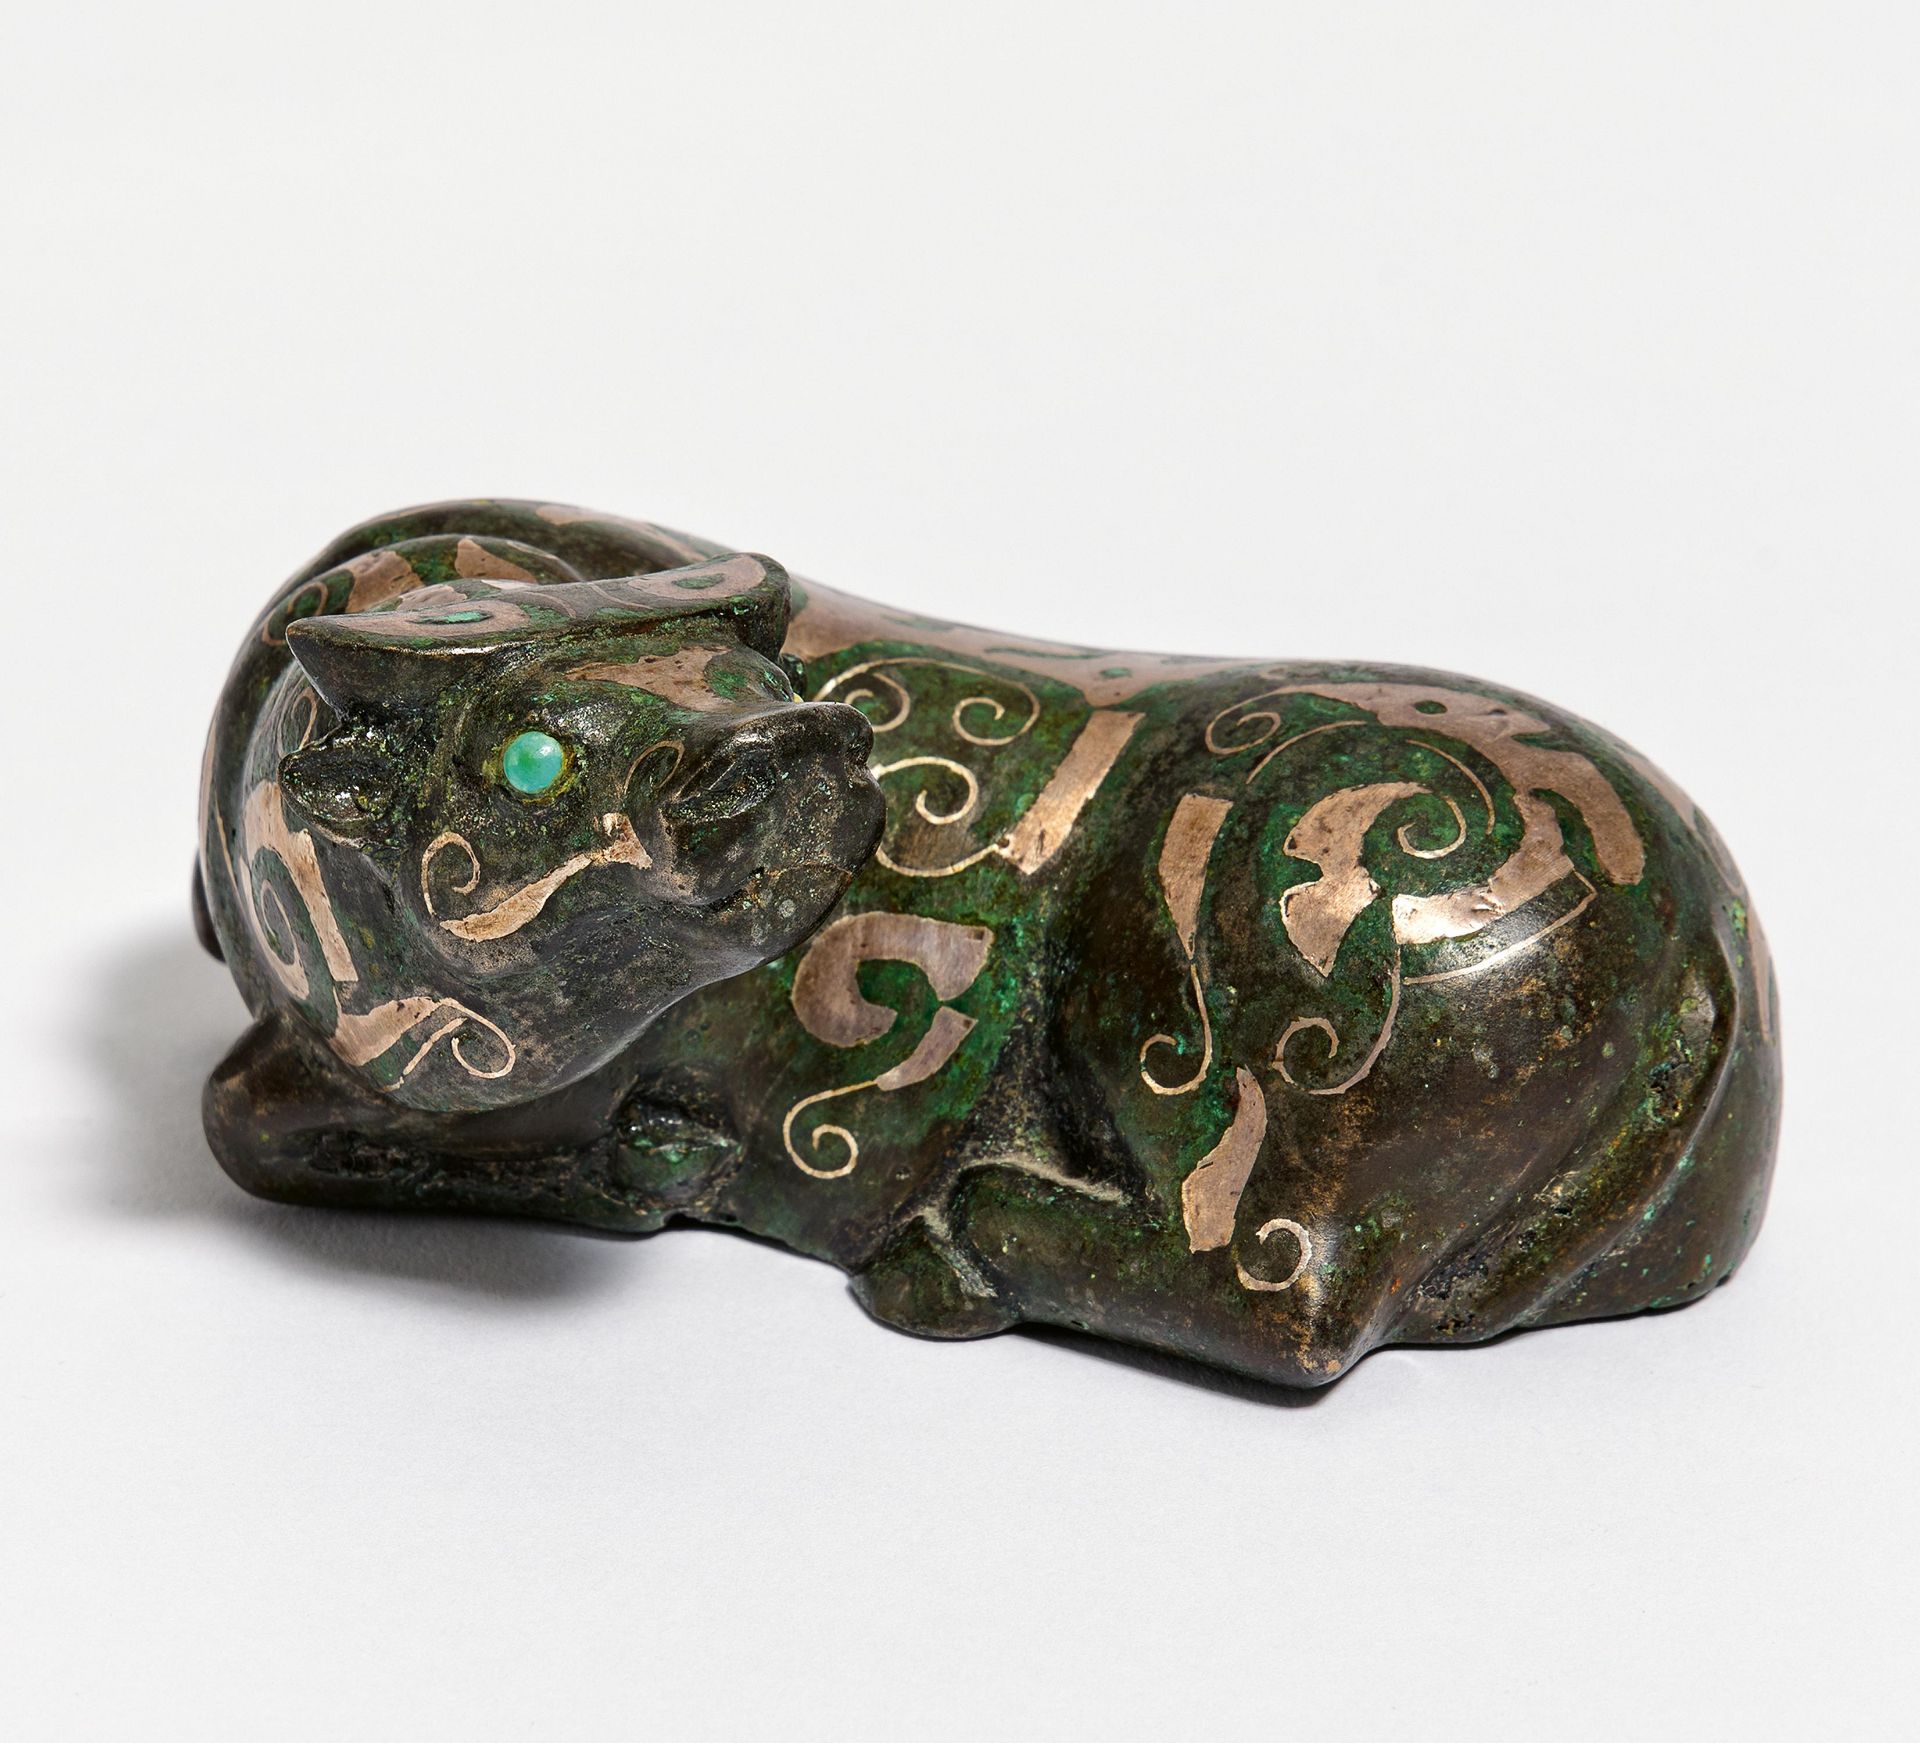 RECLINING OX. Origin: China. Maker/Designer: In the style of the Warring states, but later.